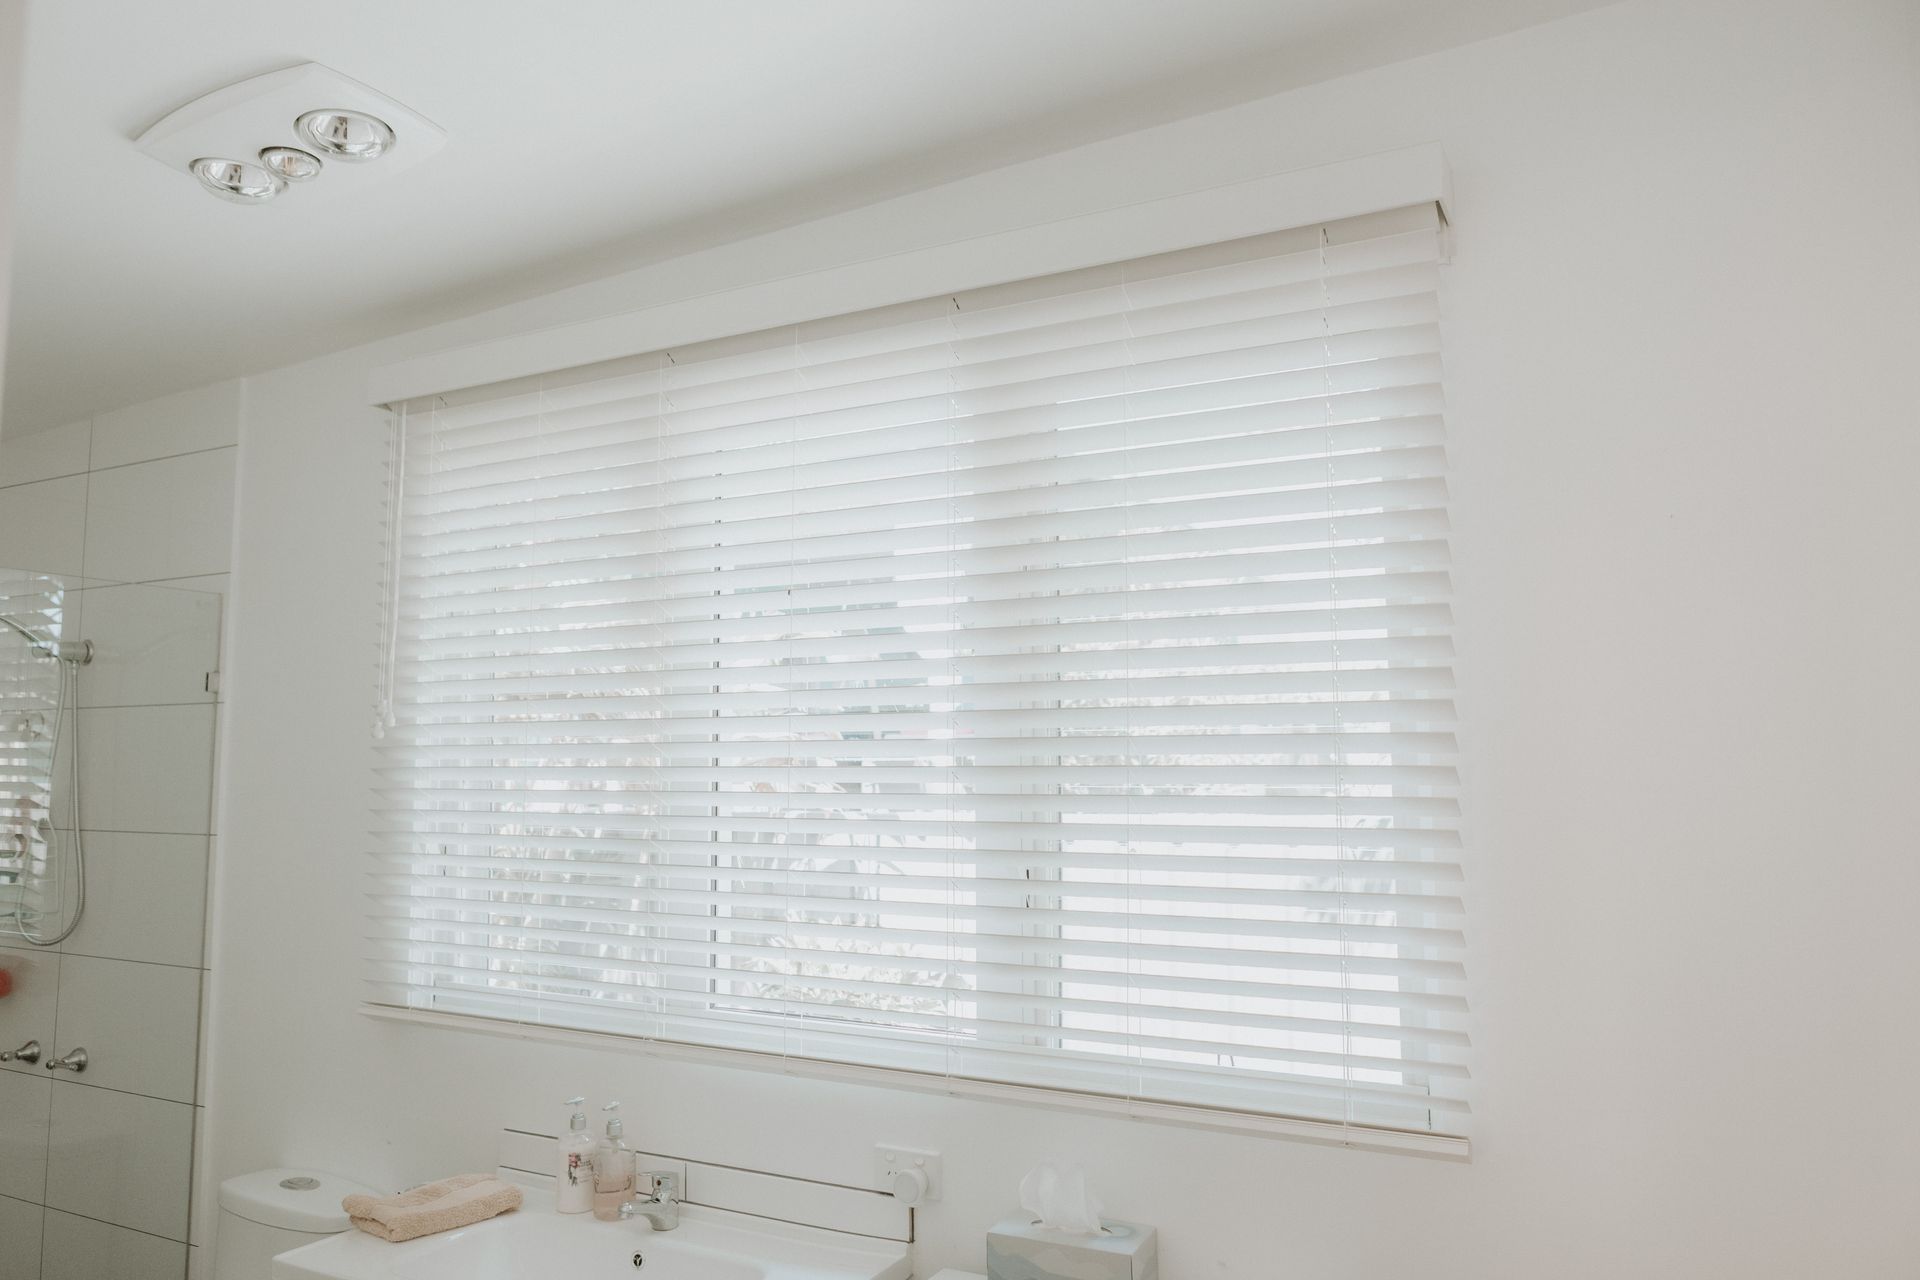 A Bathroom with A Sink and A Window with Blinds —  New Blinds and Shutter in Newcastle, NSW